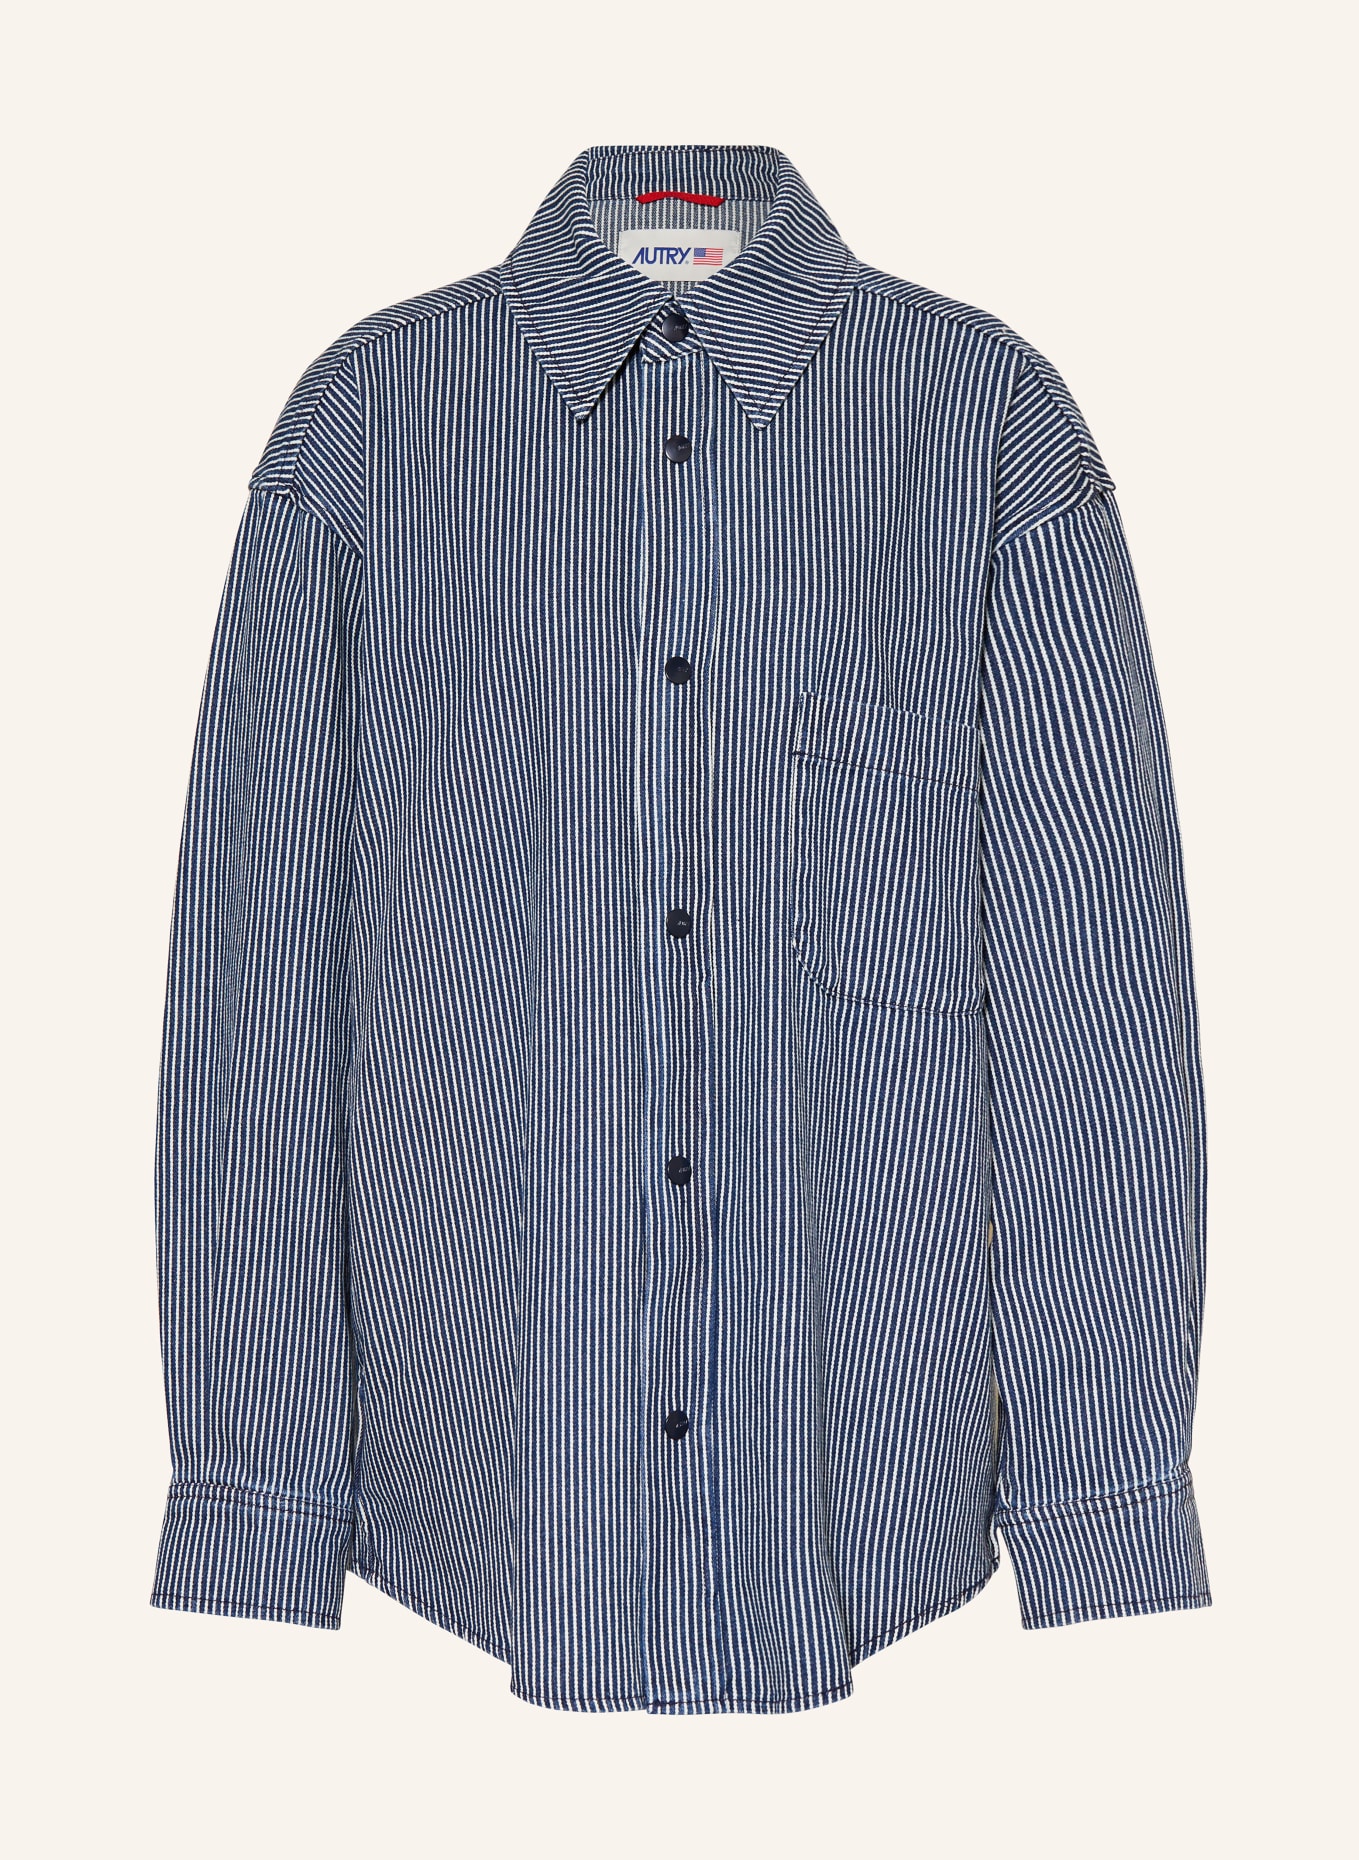 AUTRY Overshirt, Color: DARK BLUE/ WHITE (Image 1)